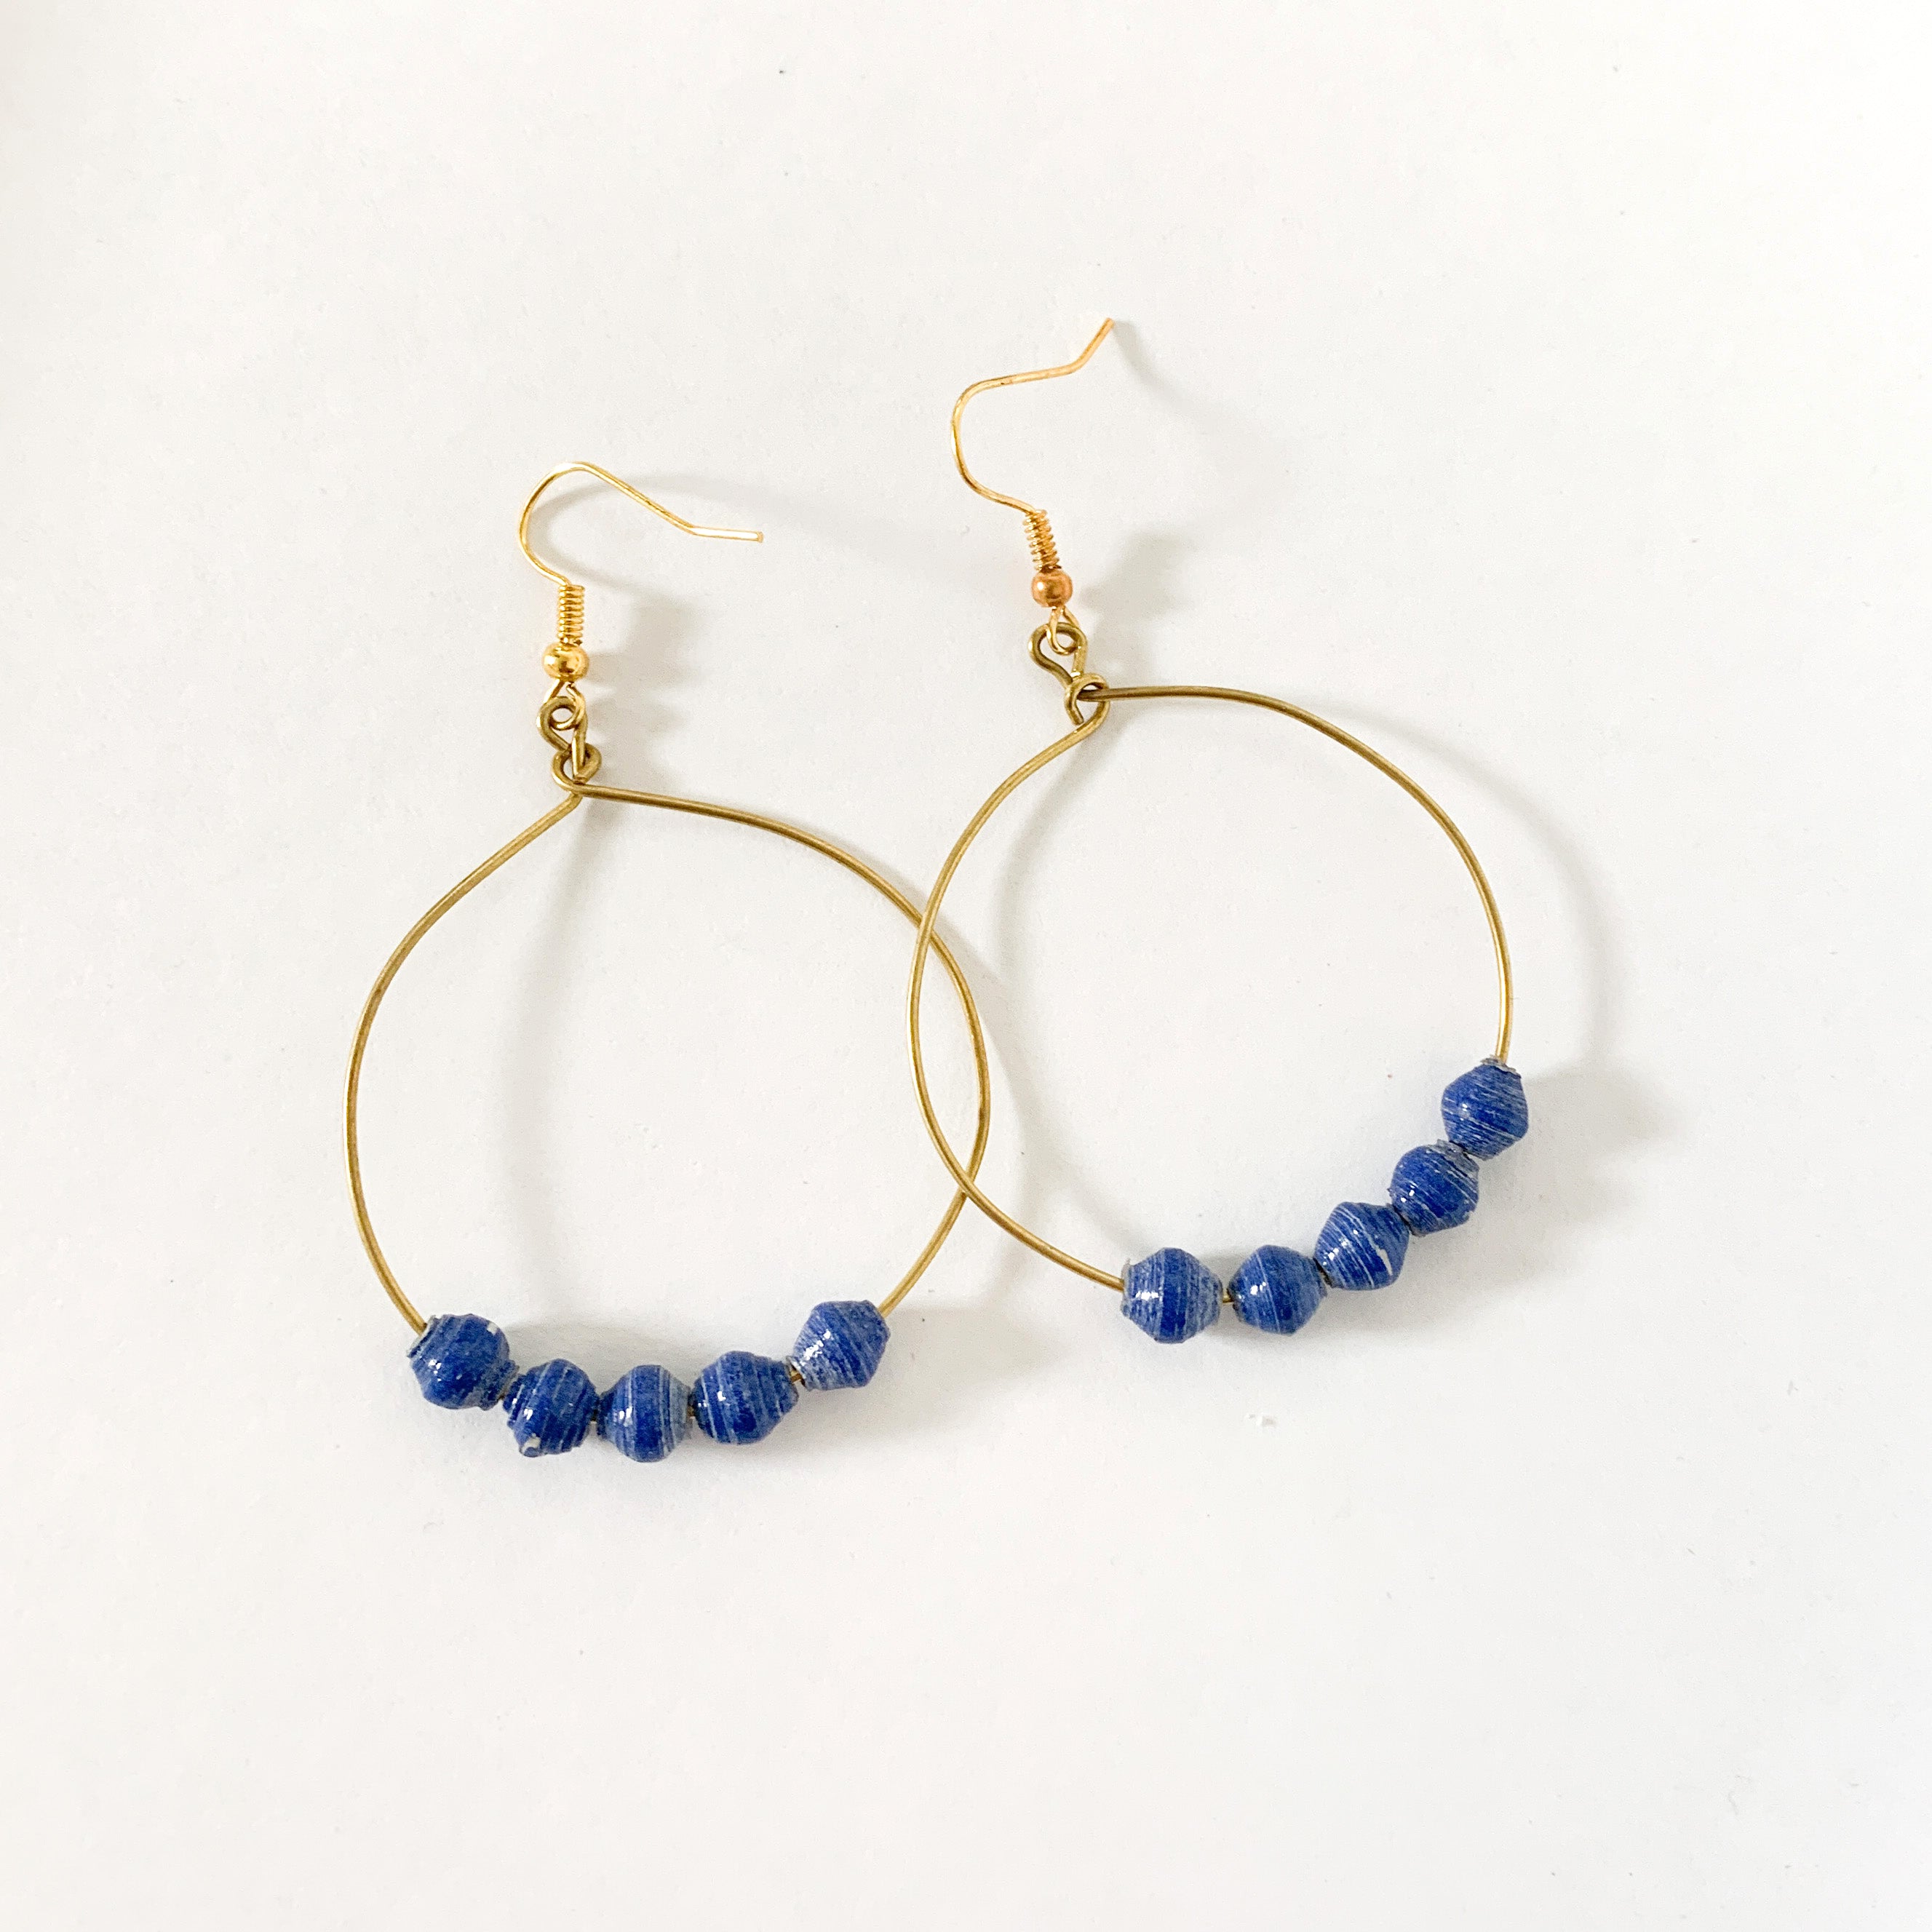 JustOne's brass hoop earrings with five blue paper beads on the bottom of the hoop, handcrafted in Uganda